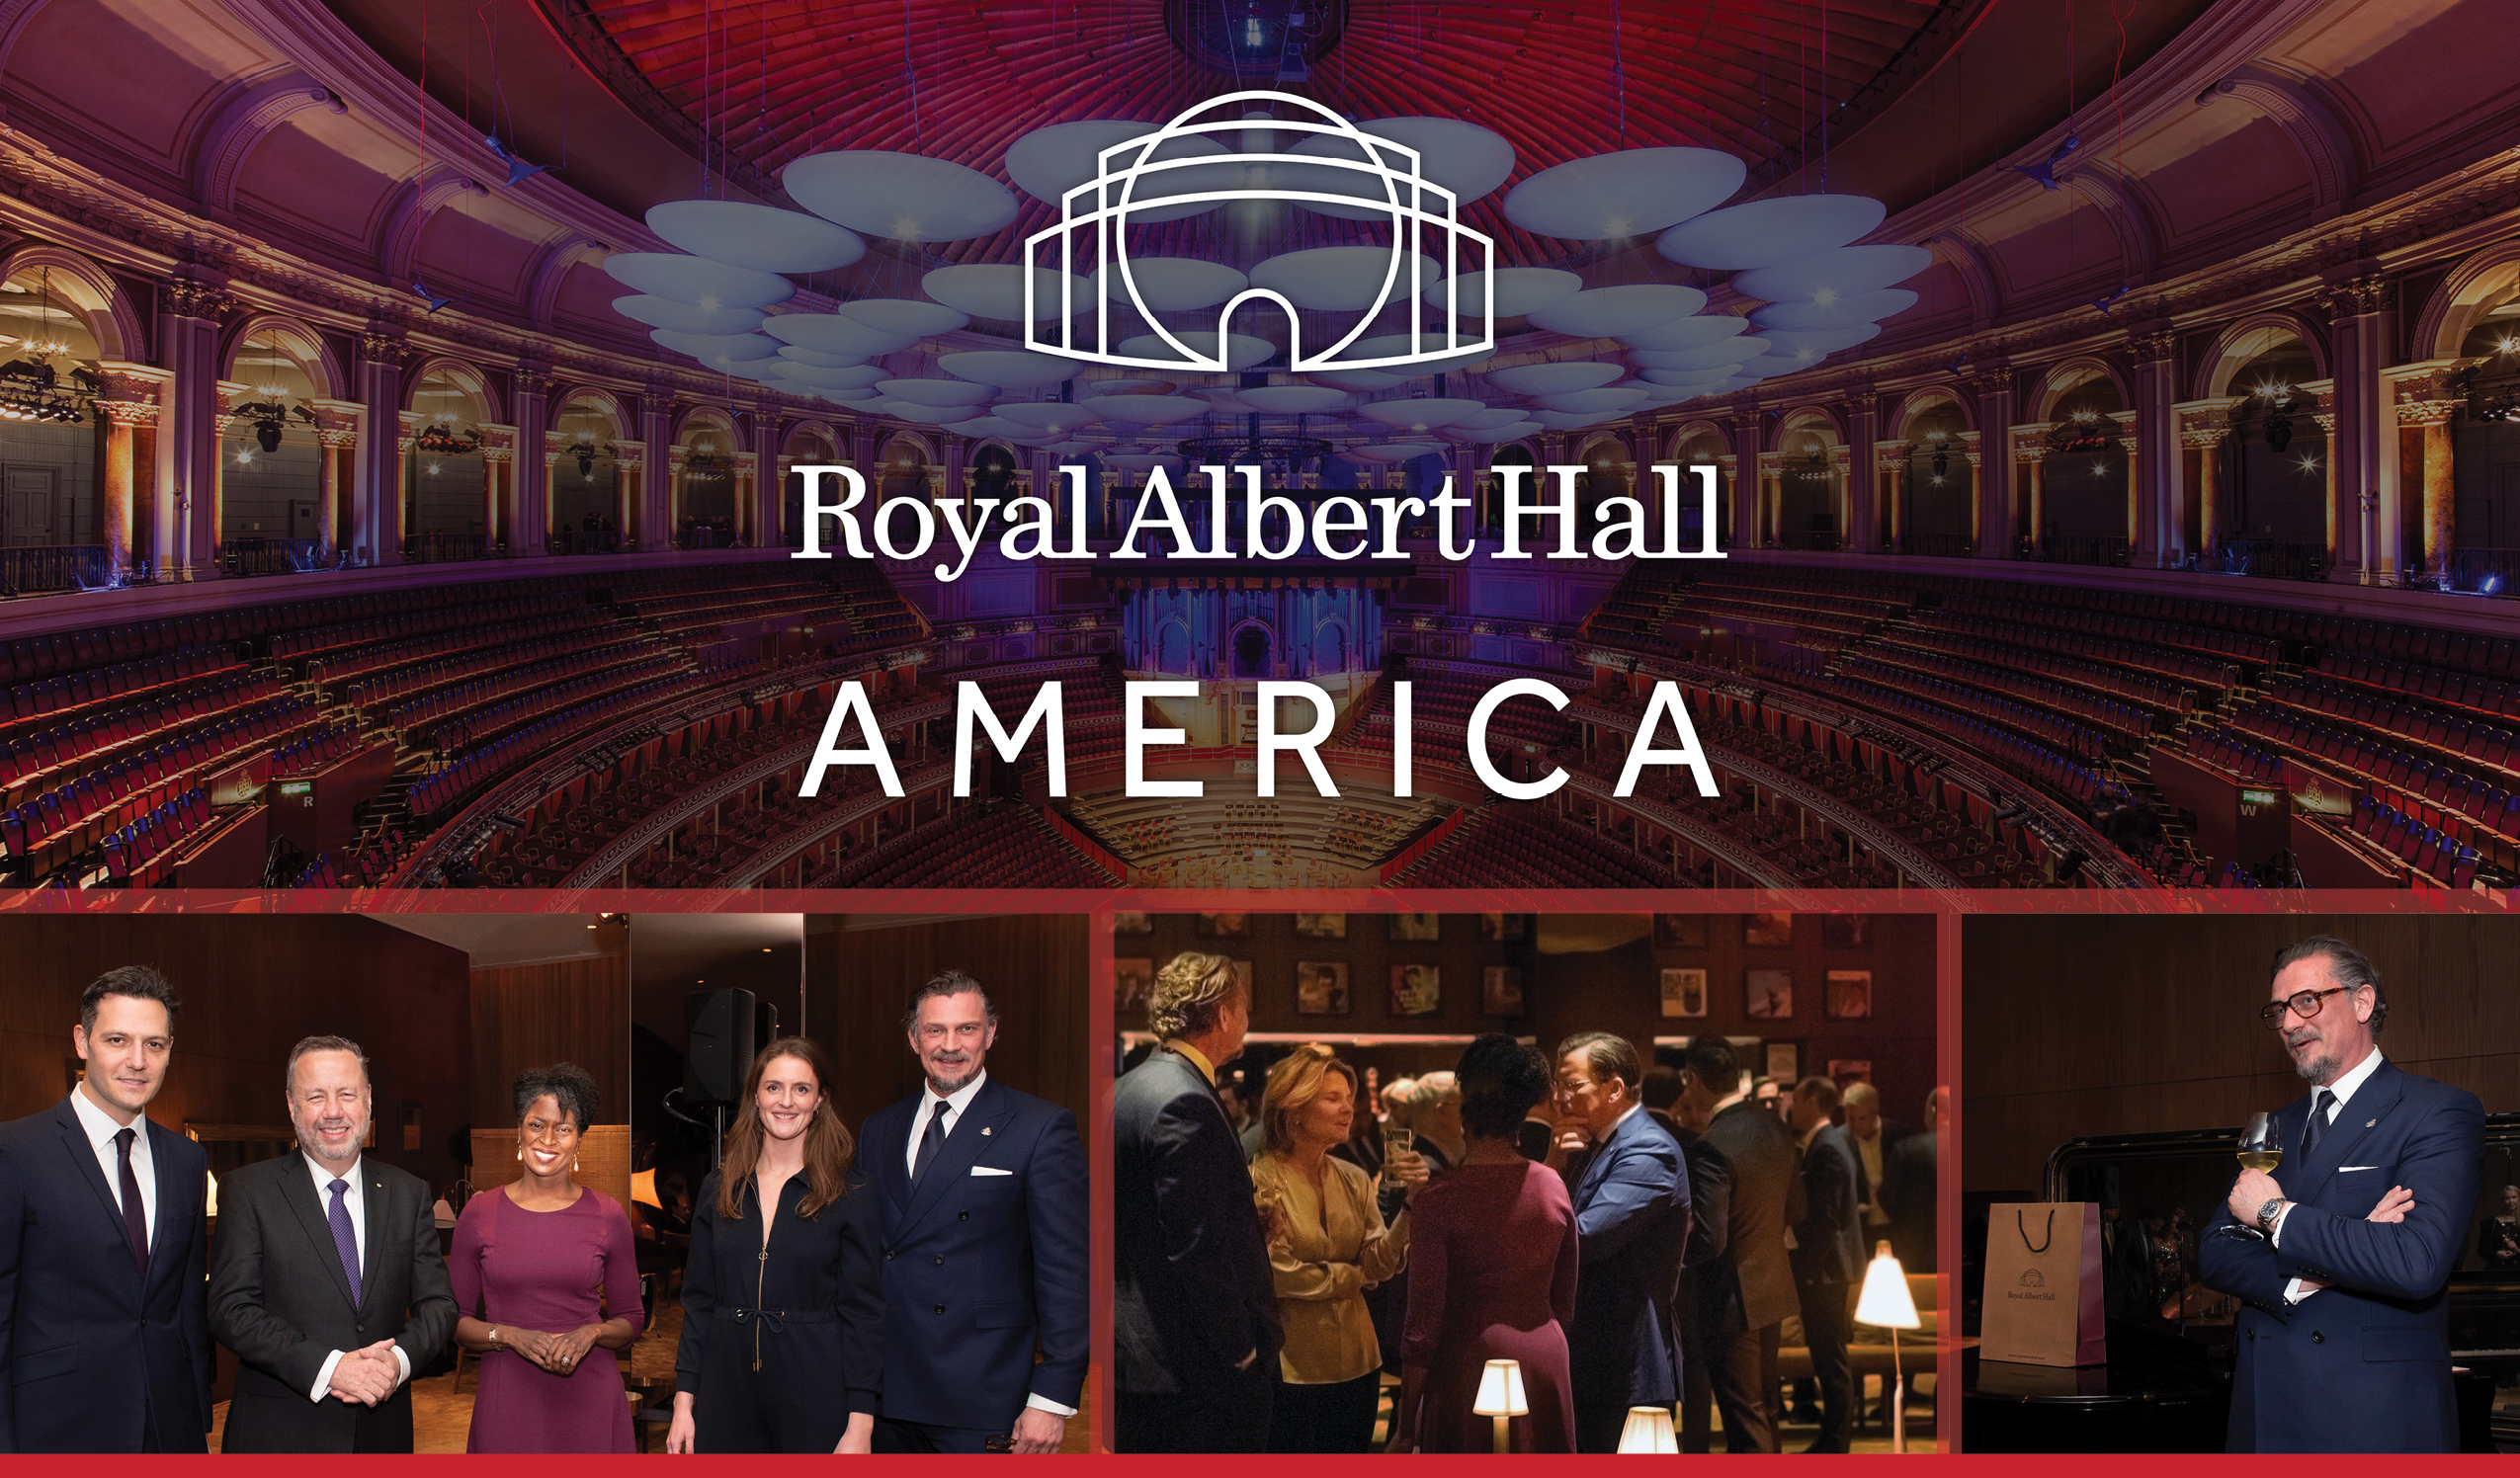 Mo El Husseiny is re-elected as a director of the Royal Albert Hall America